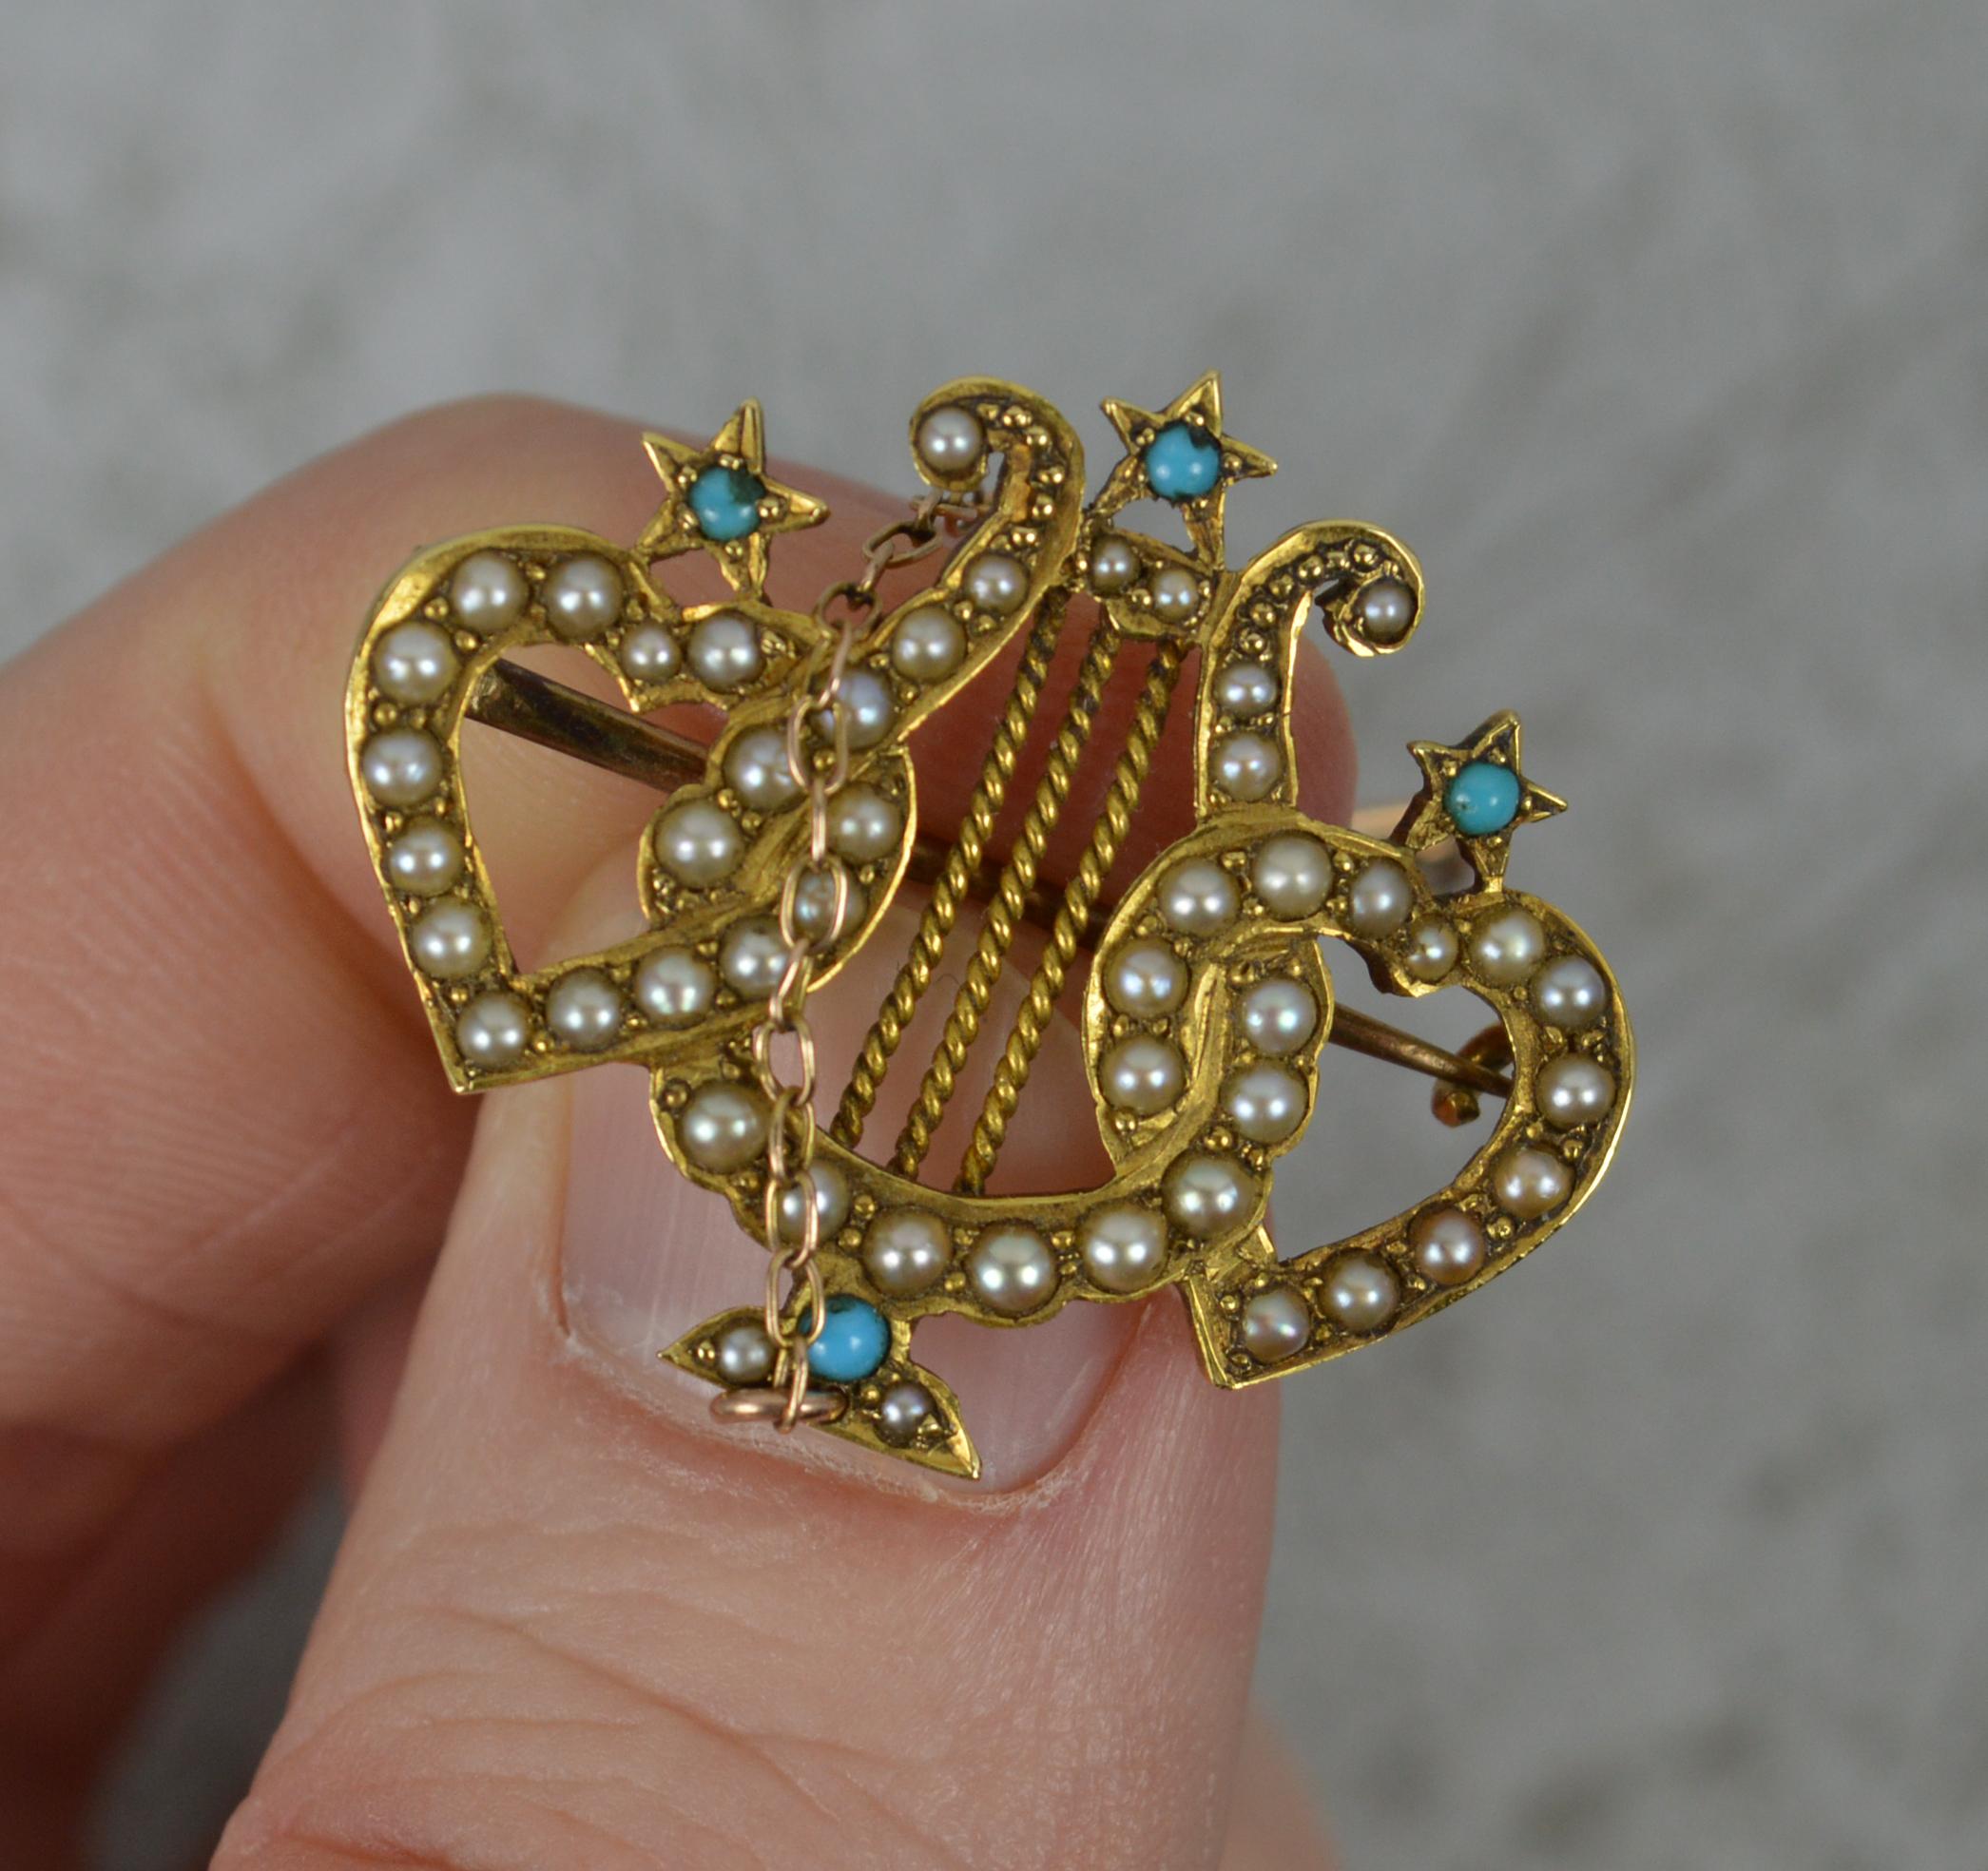 A true mid to late Victorian era brooch. c1880.
Solid 18 carat yellow gold example.
Designed with a musical lyre to centre with two entwined hearts, one set to each side. 
All encrusted with seed pearls and turquoise stones.

CONDITION ; Very good